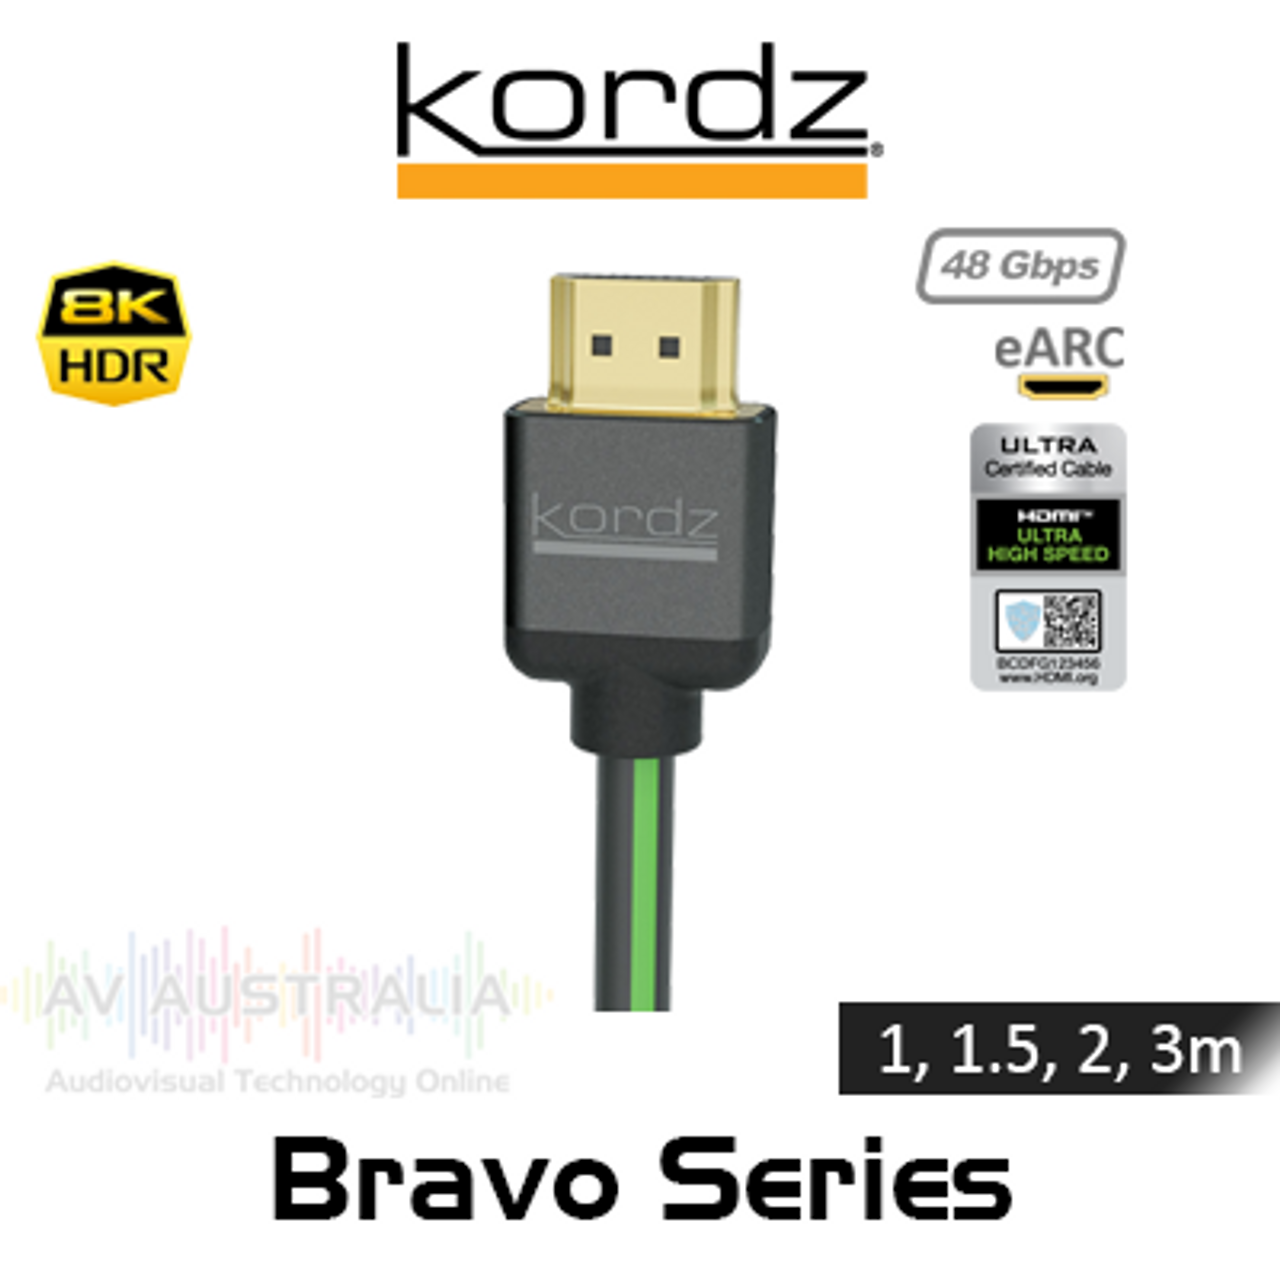 Kordz Bravo Series 8K 48Gbps Dynamic HDR Ultra High Speed Certified HDMI Cables (1, 1.5, 2, 3m)